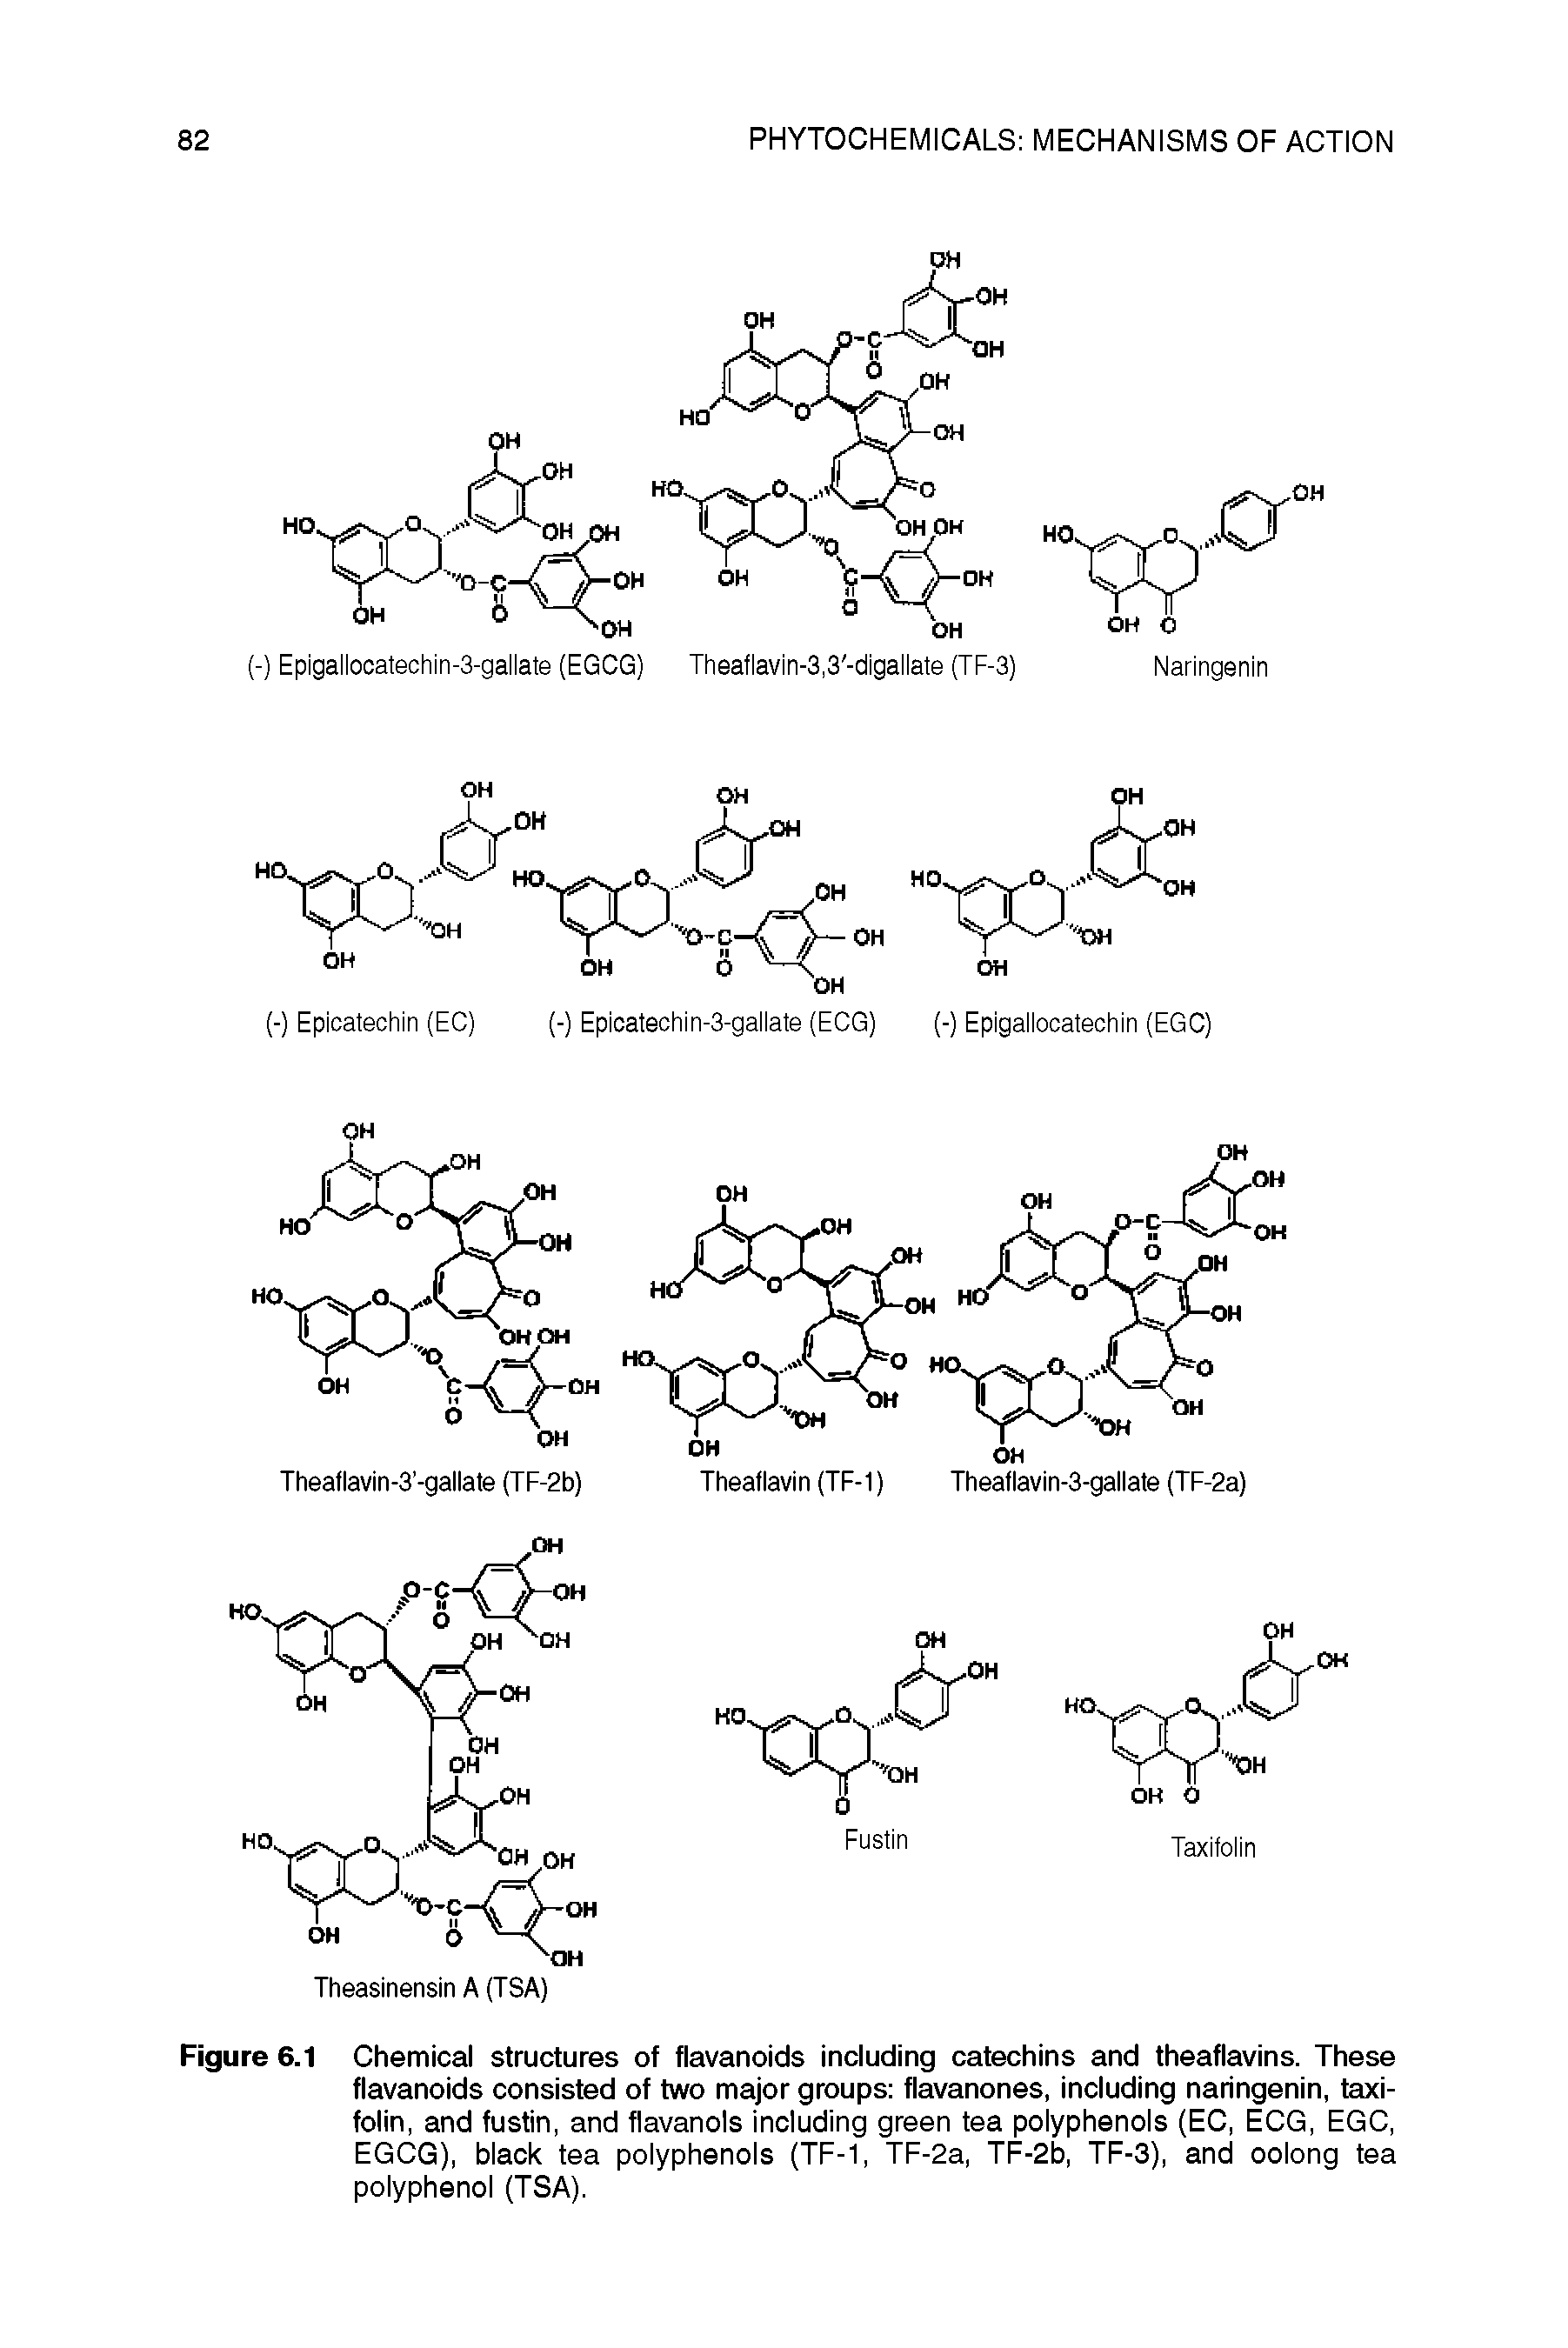 Figure 6.1 Chemical structures of flavanoids including catechins and theaflavins. These tiavanoids consisted of two major groups flavanones, including naringenin, taxifolin, and fustin, and flavanols including green tea polyphenols (EC, ECG, EGC, EGCG), black tea polyphenols (TF-1, TF-2a, TF-2b, TF-3), and oolong tea polyphenol (TSA).